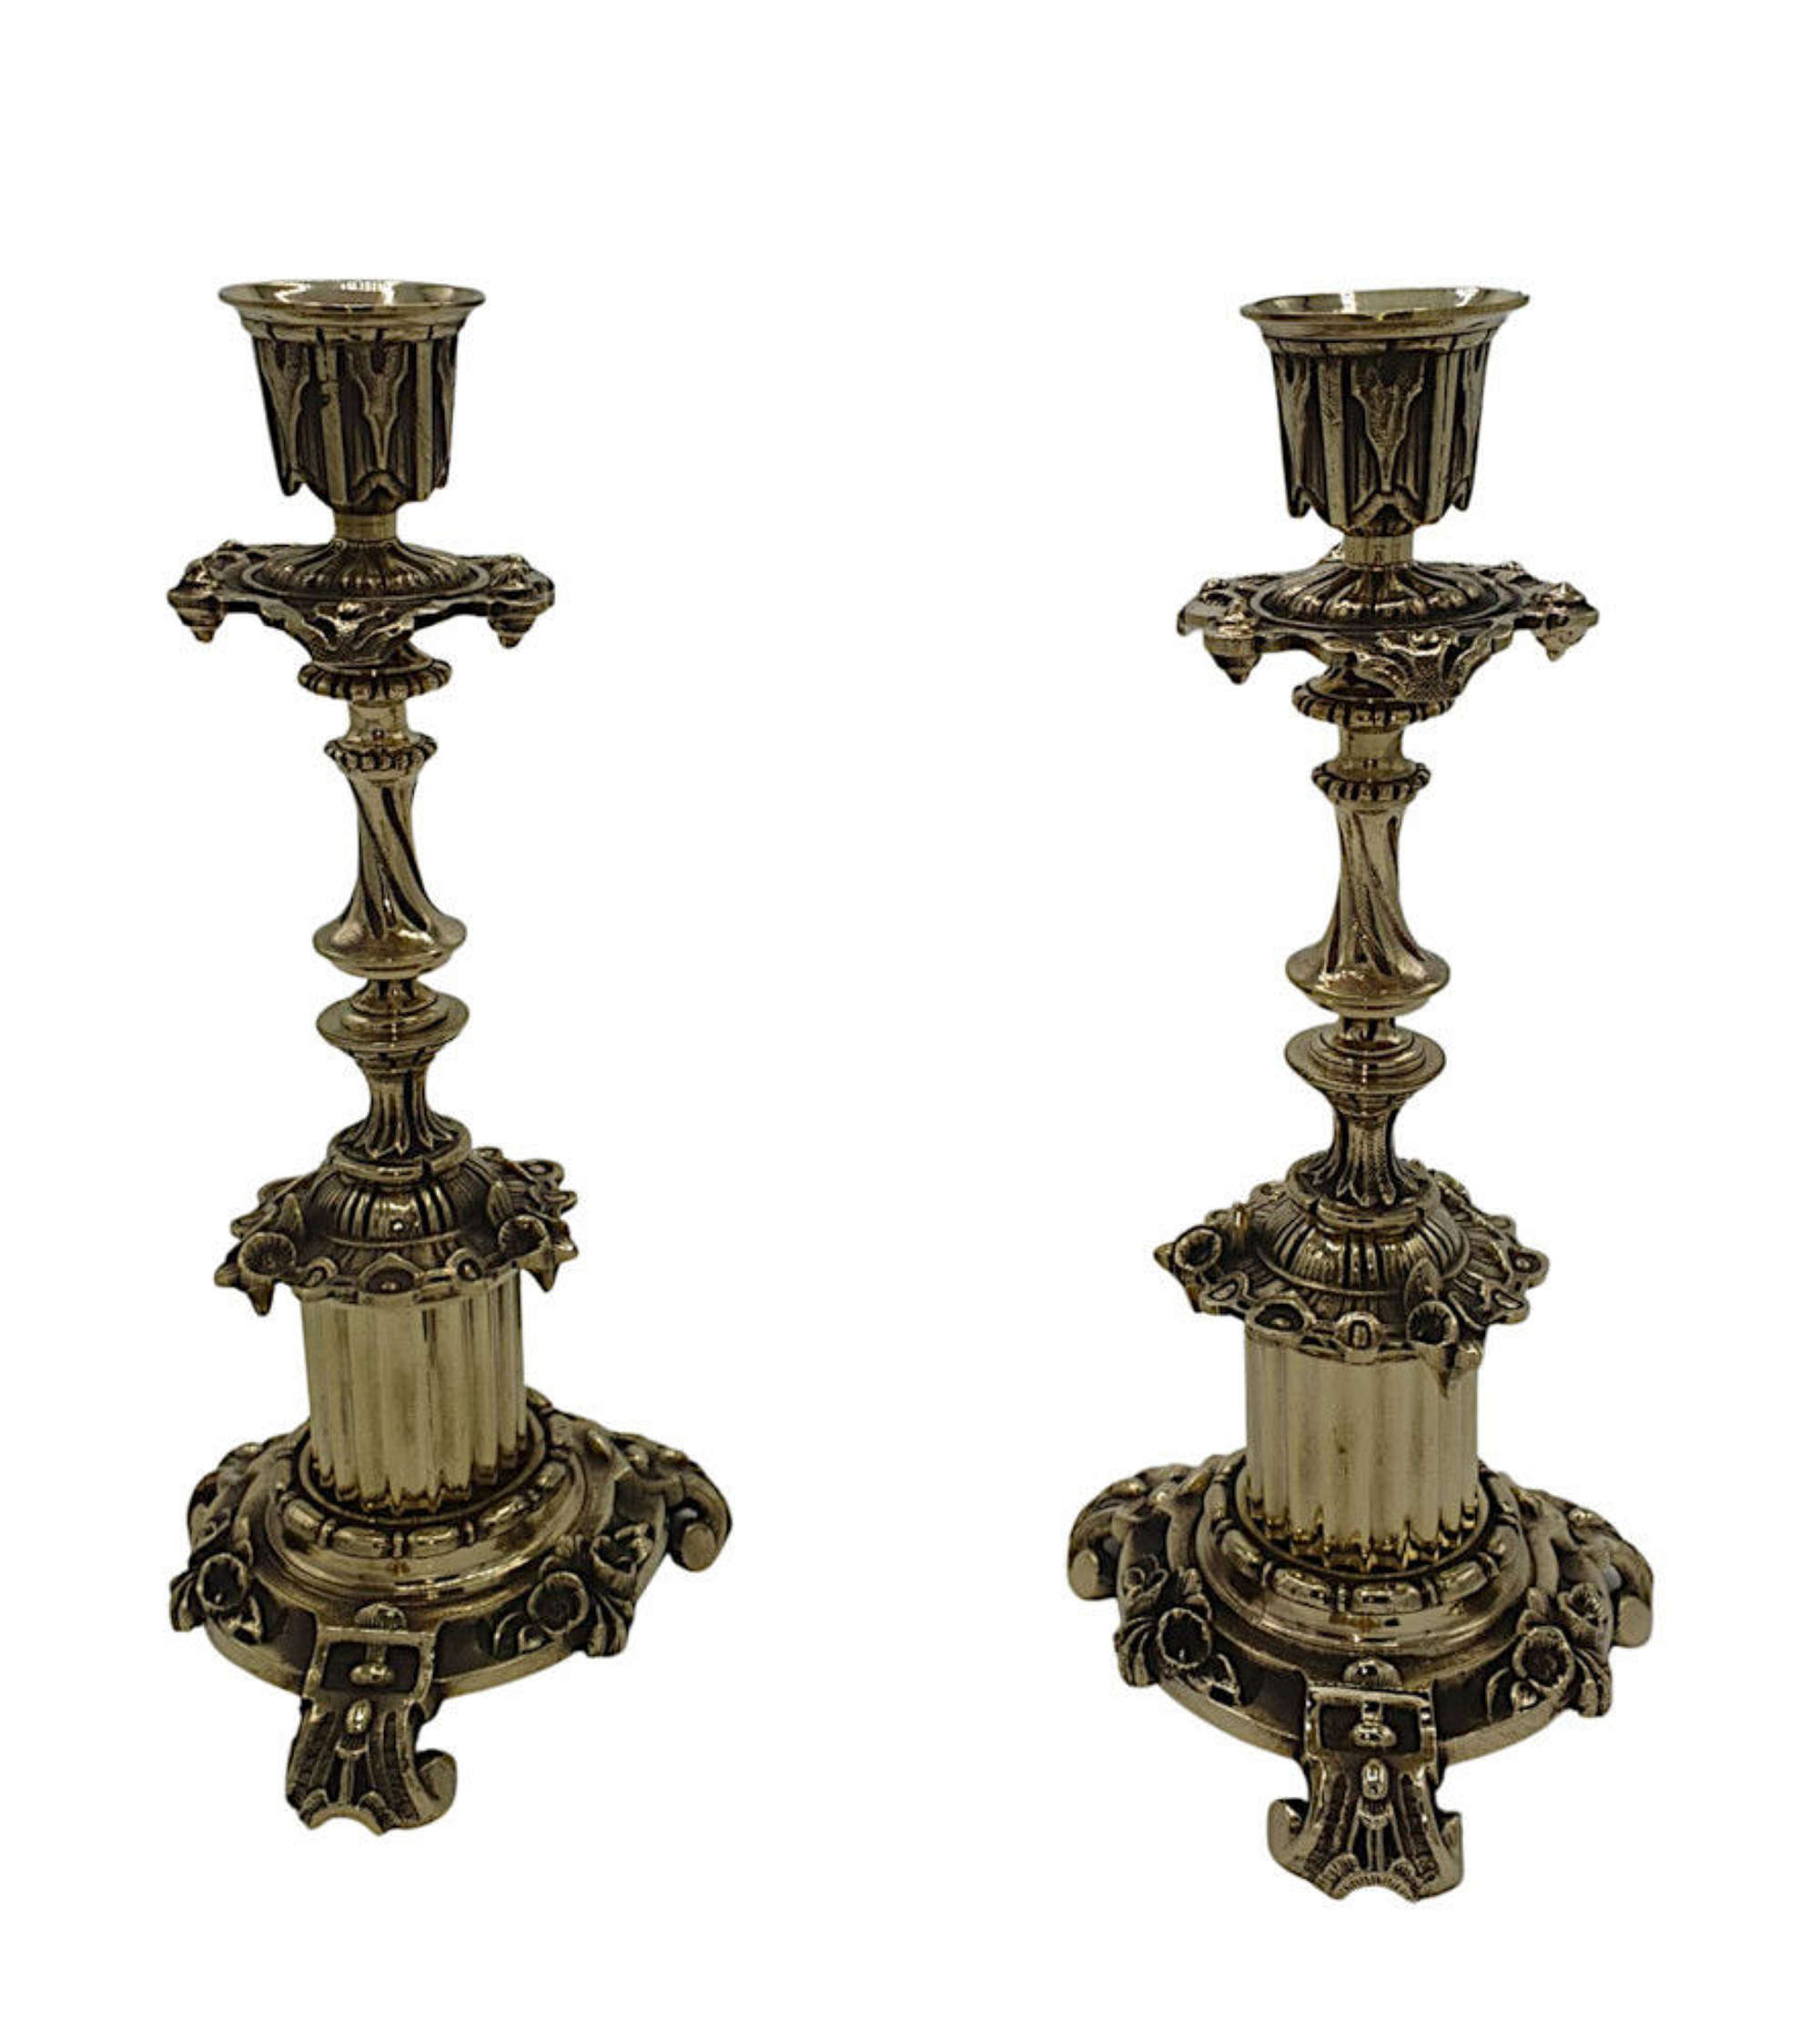 A Lovely Pair Of 19th Century Polished Brass Candlesticks